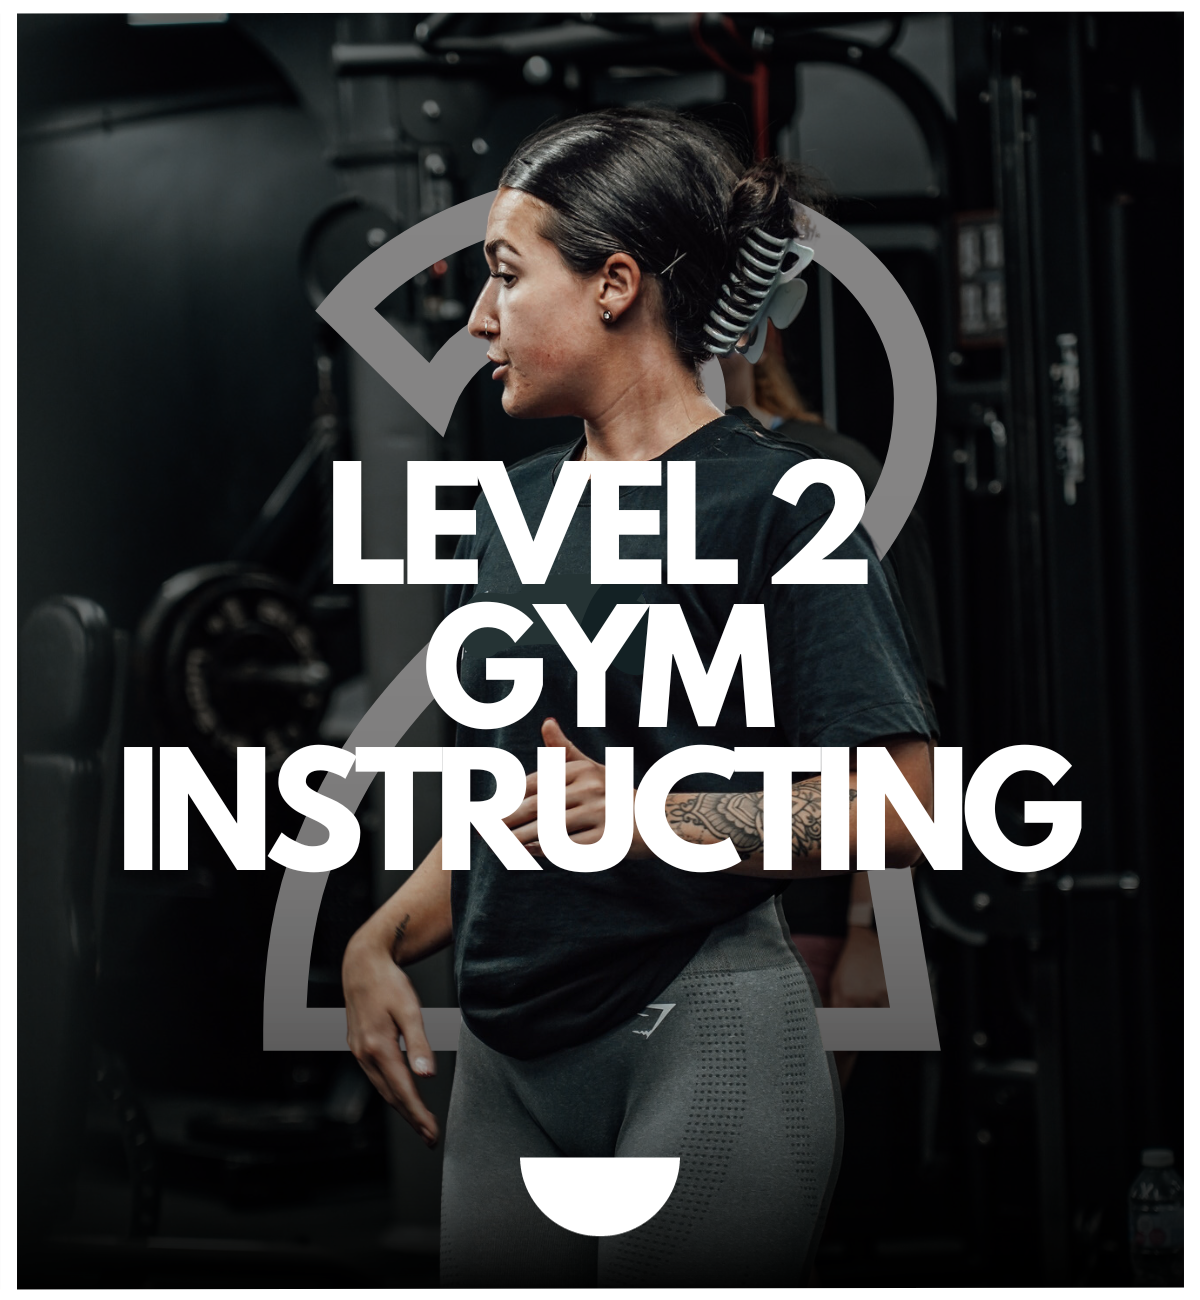 Level 2 Certificate in Gym Instructing